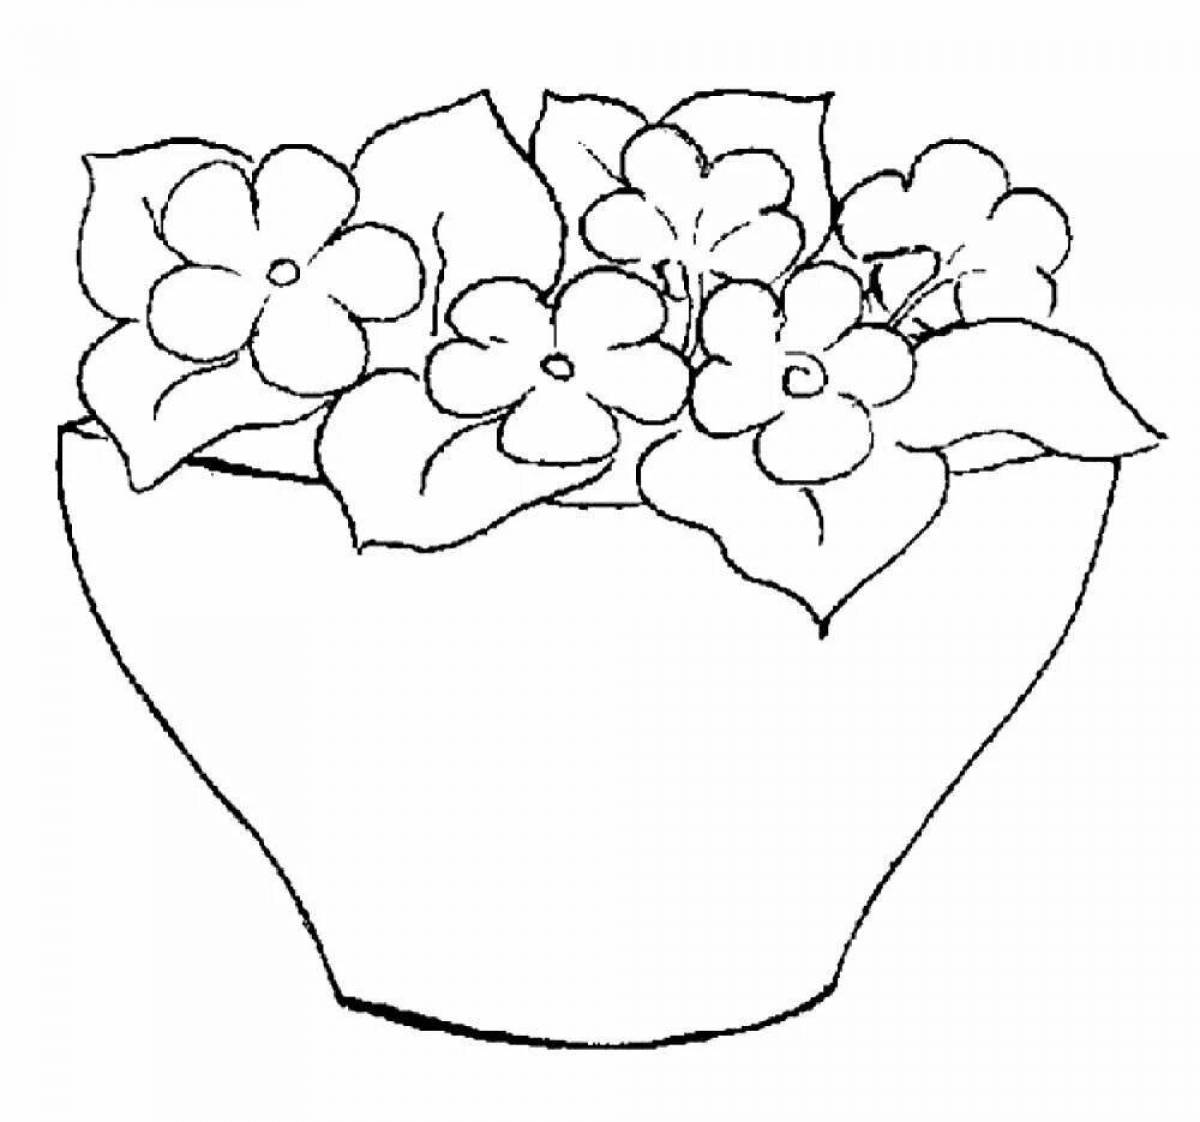 Vivacious coloring page senior group indoor plants